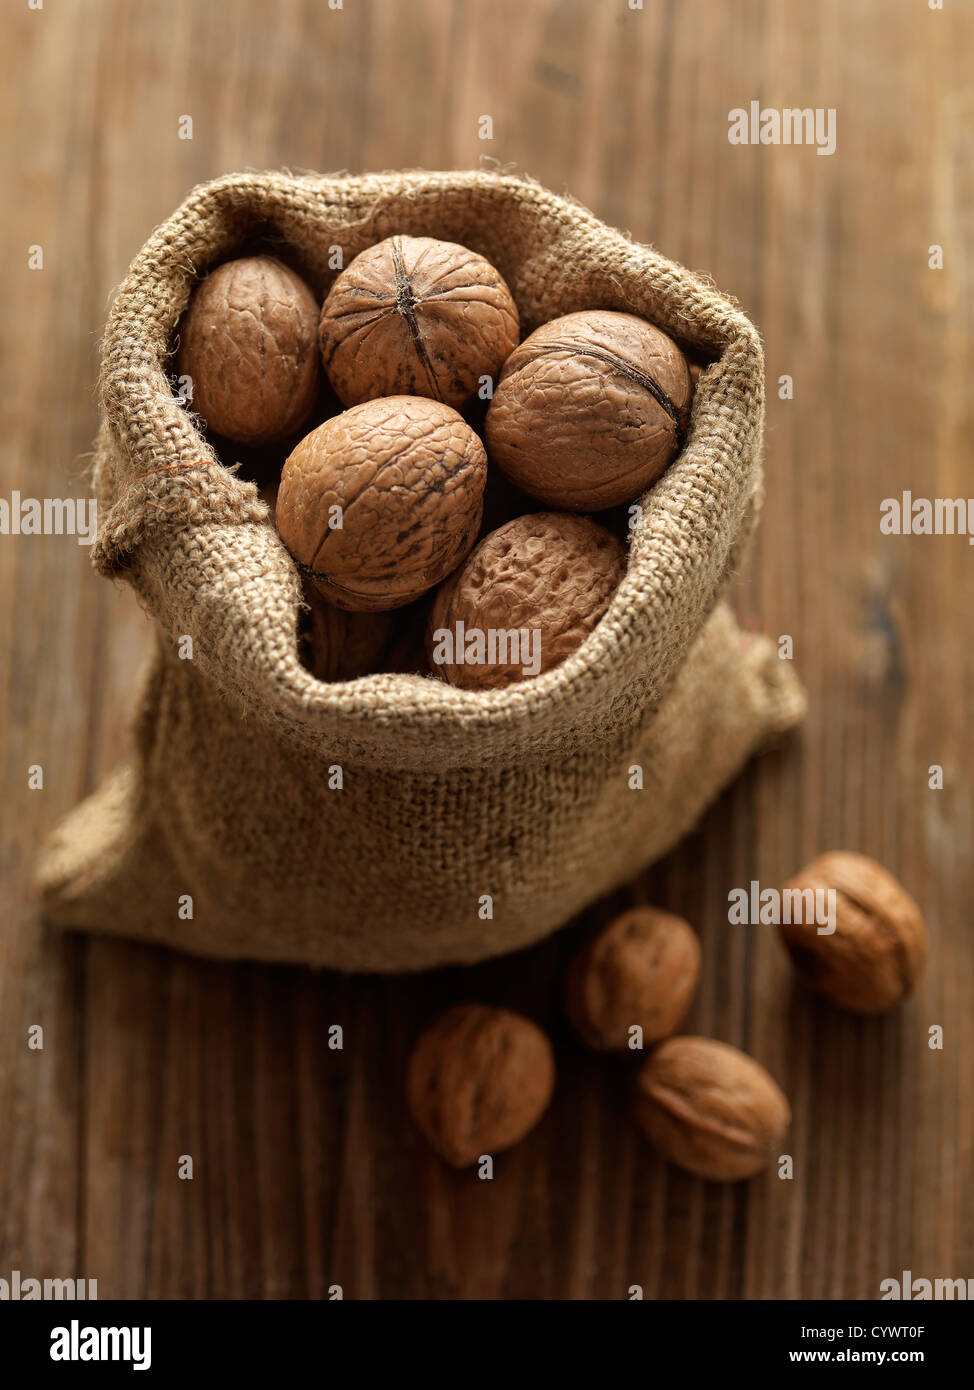 walnuts in woven bag on rustic wooden table Stock Photo